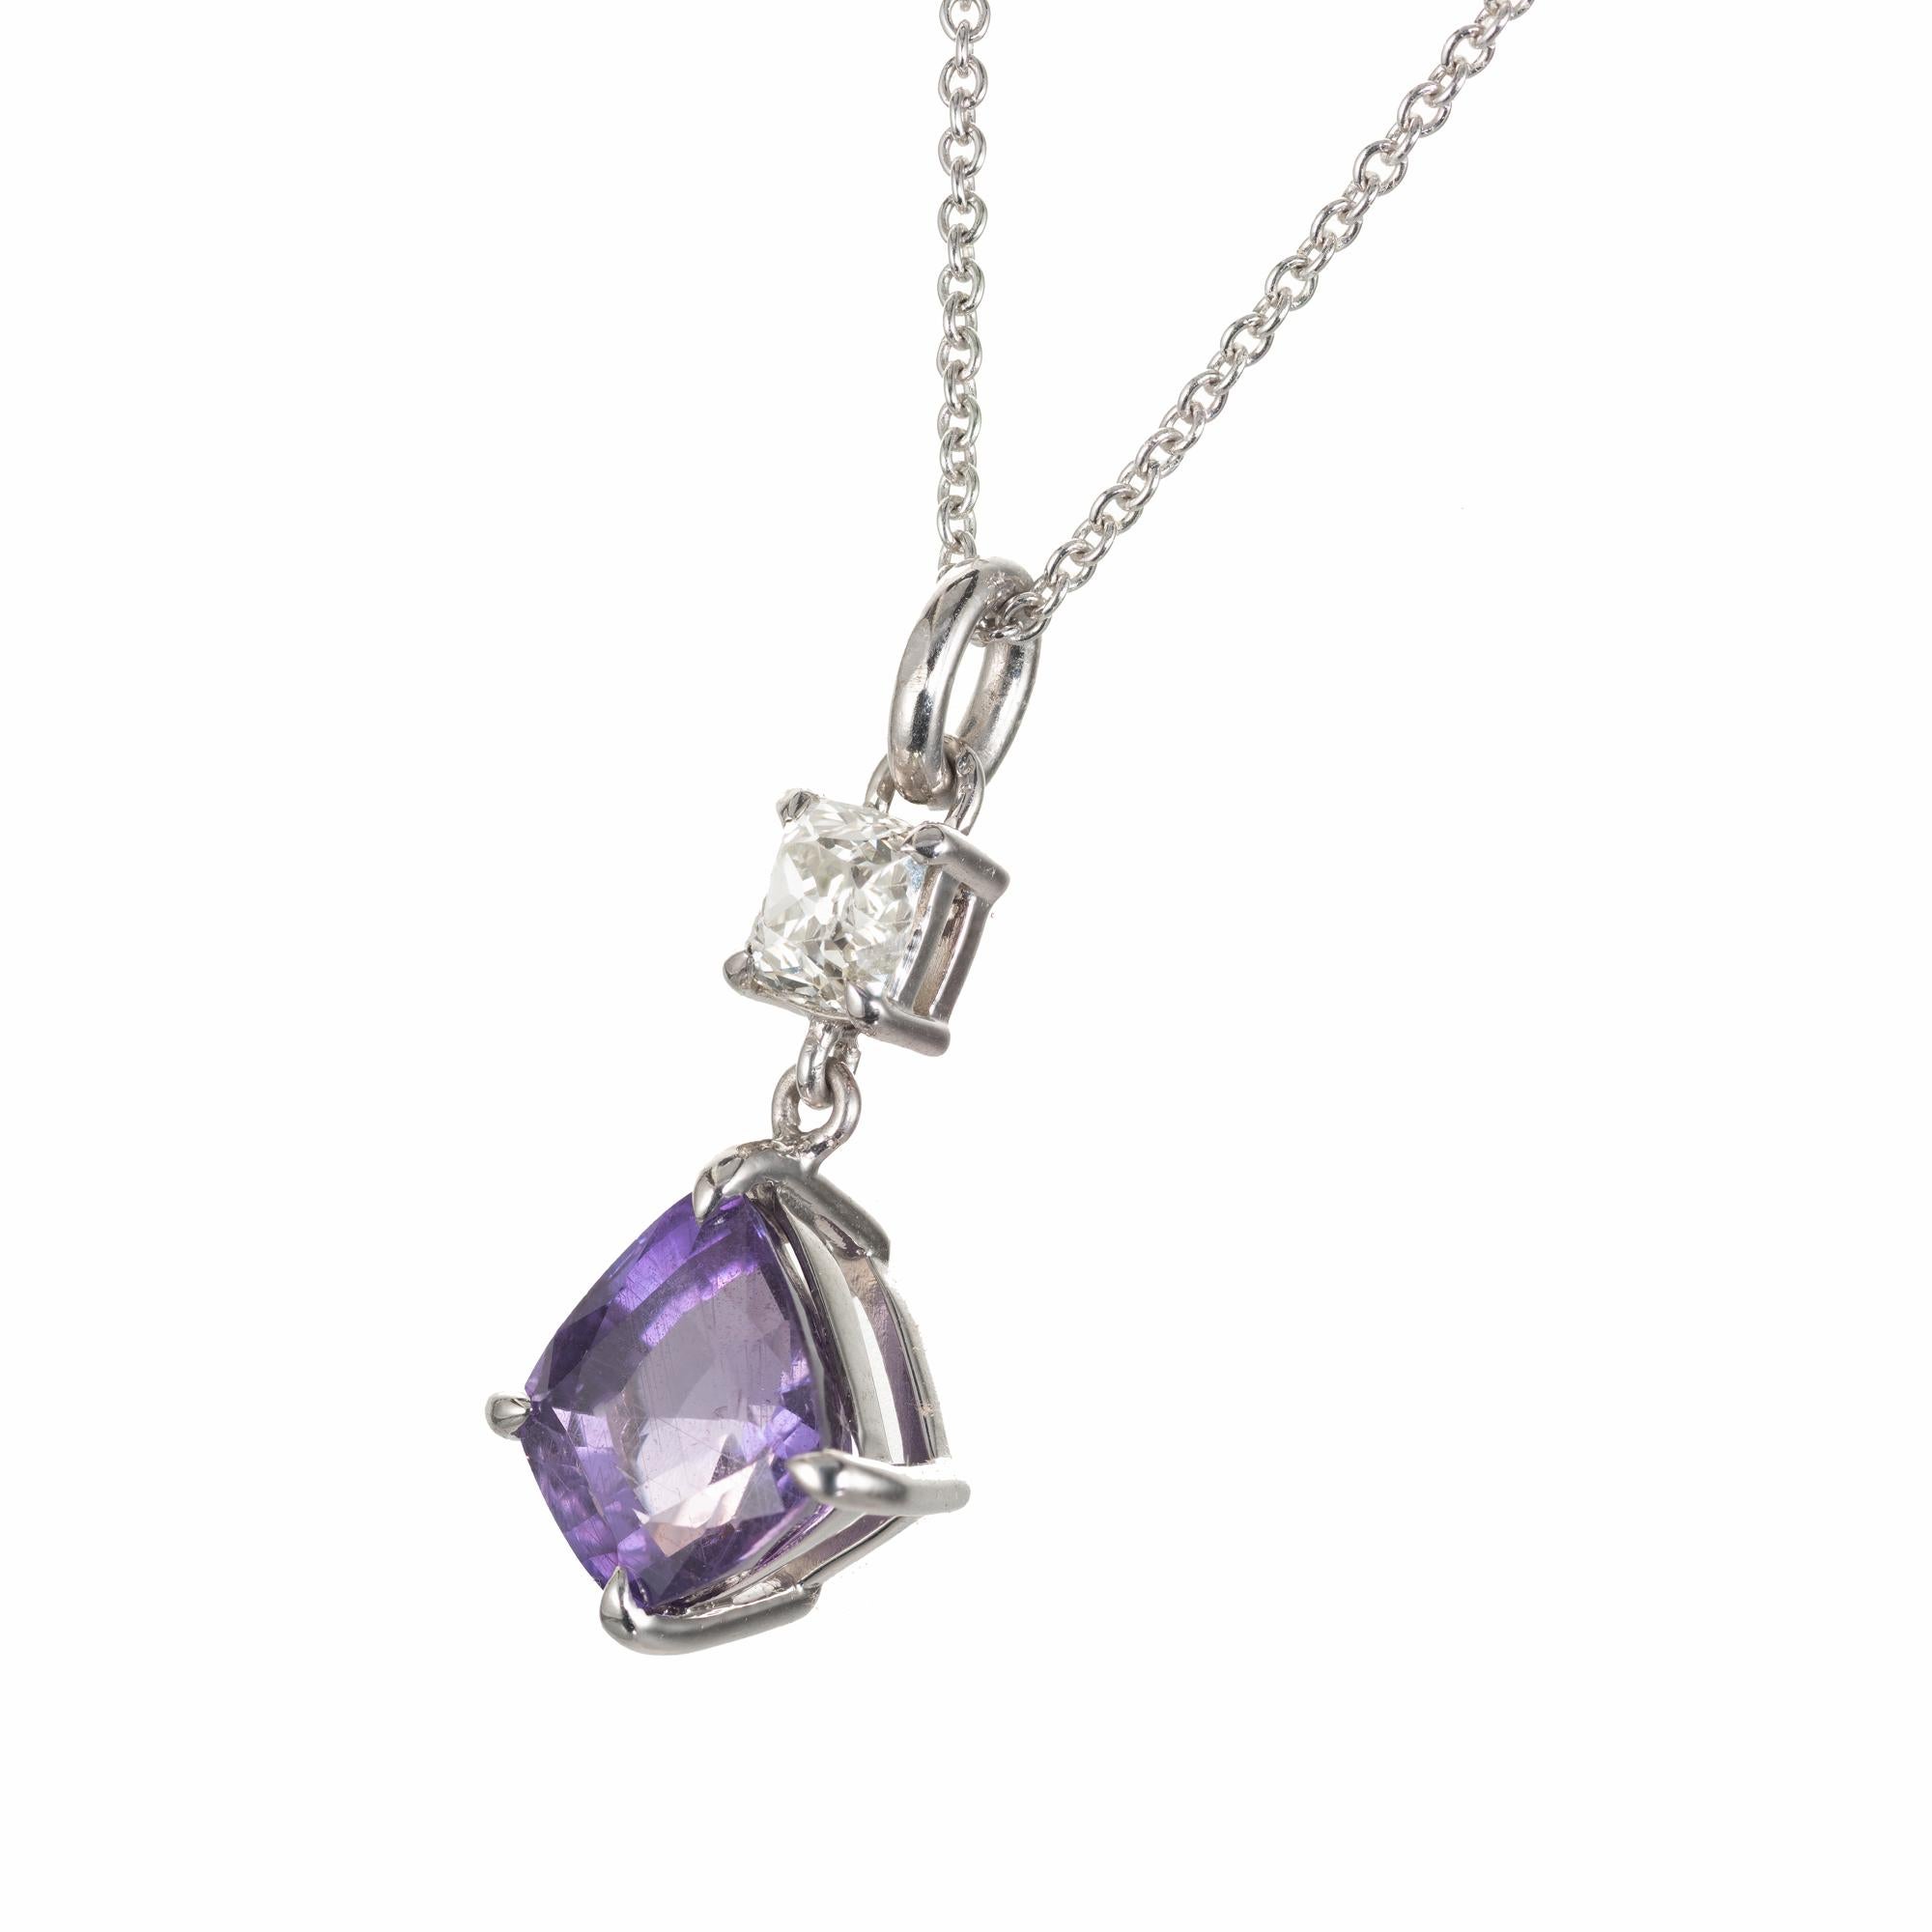 Natural GIA certified purple sapphire and diamond pendant necklace. Kite shaped 3.18 sapphire a cushion shaped accent diamond set in a platinum setting with an 18 inch platinum chain. Designed and crafted in the Peter Suchy Workshop.  

1 kite shape